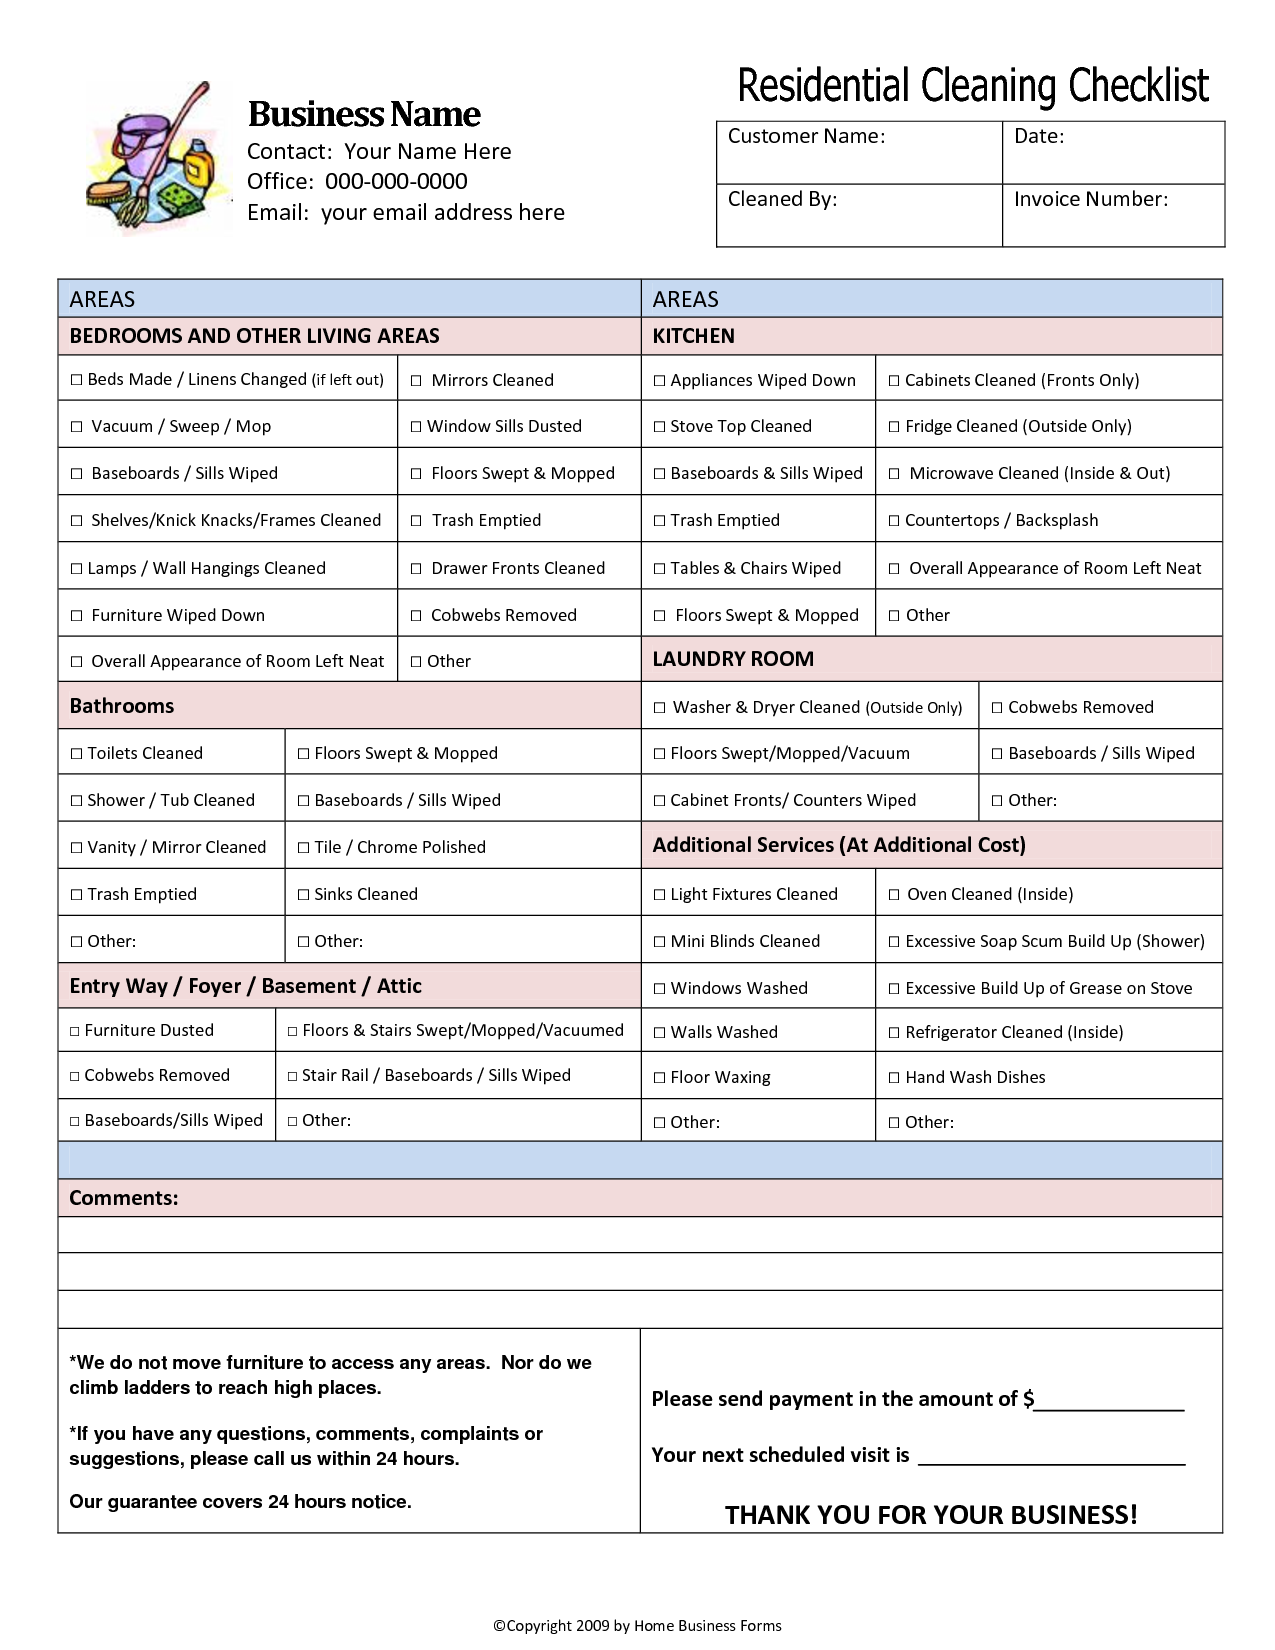 Free Residential Cleaning Checklist Template